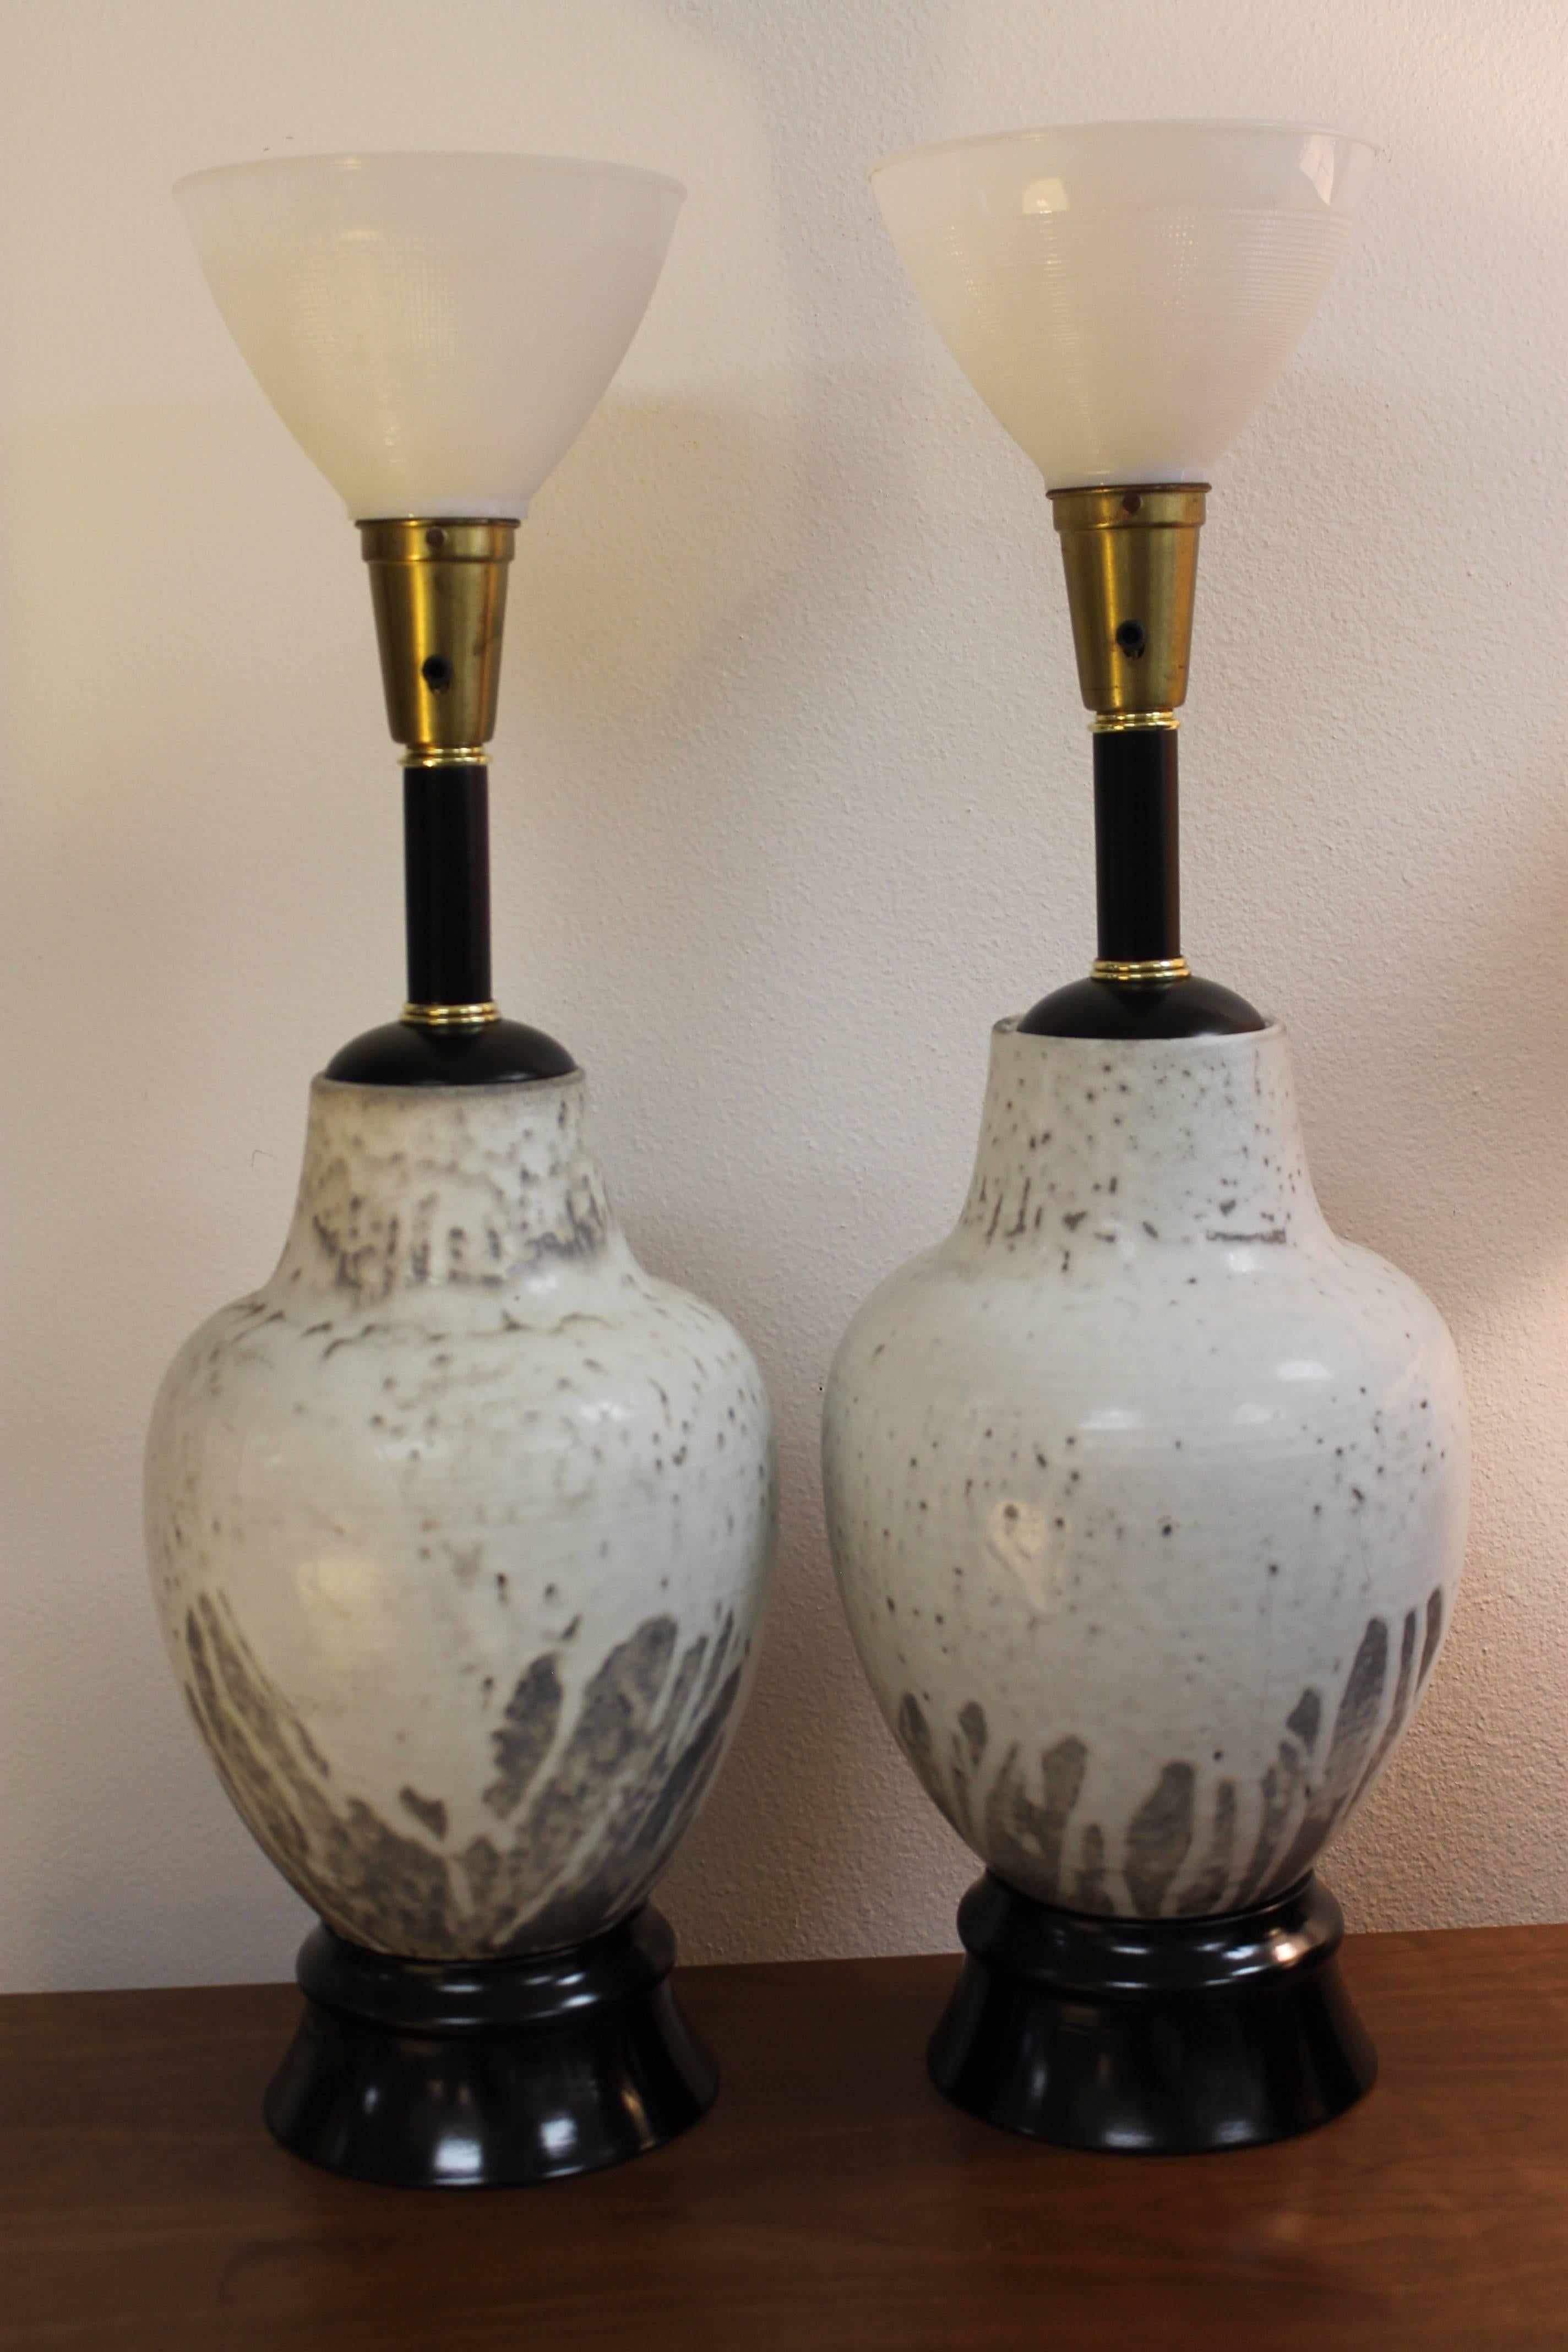 Pair of handcrafted all original stoneware lamps by Mobach, Made in Holland. Bases have been repainted and professionally rewired. We're including pictures of the ceramic portions while being rewired displaying the maker. Lamps measure 31” high from